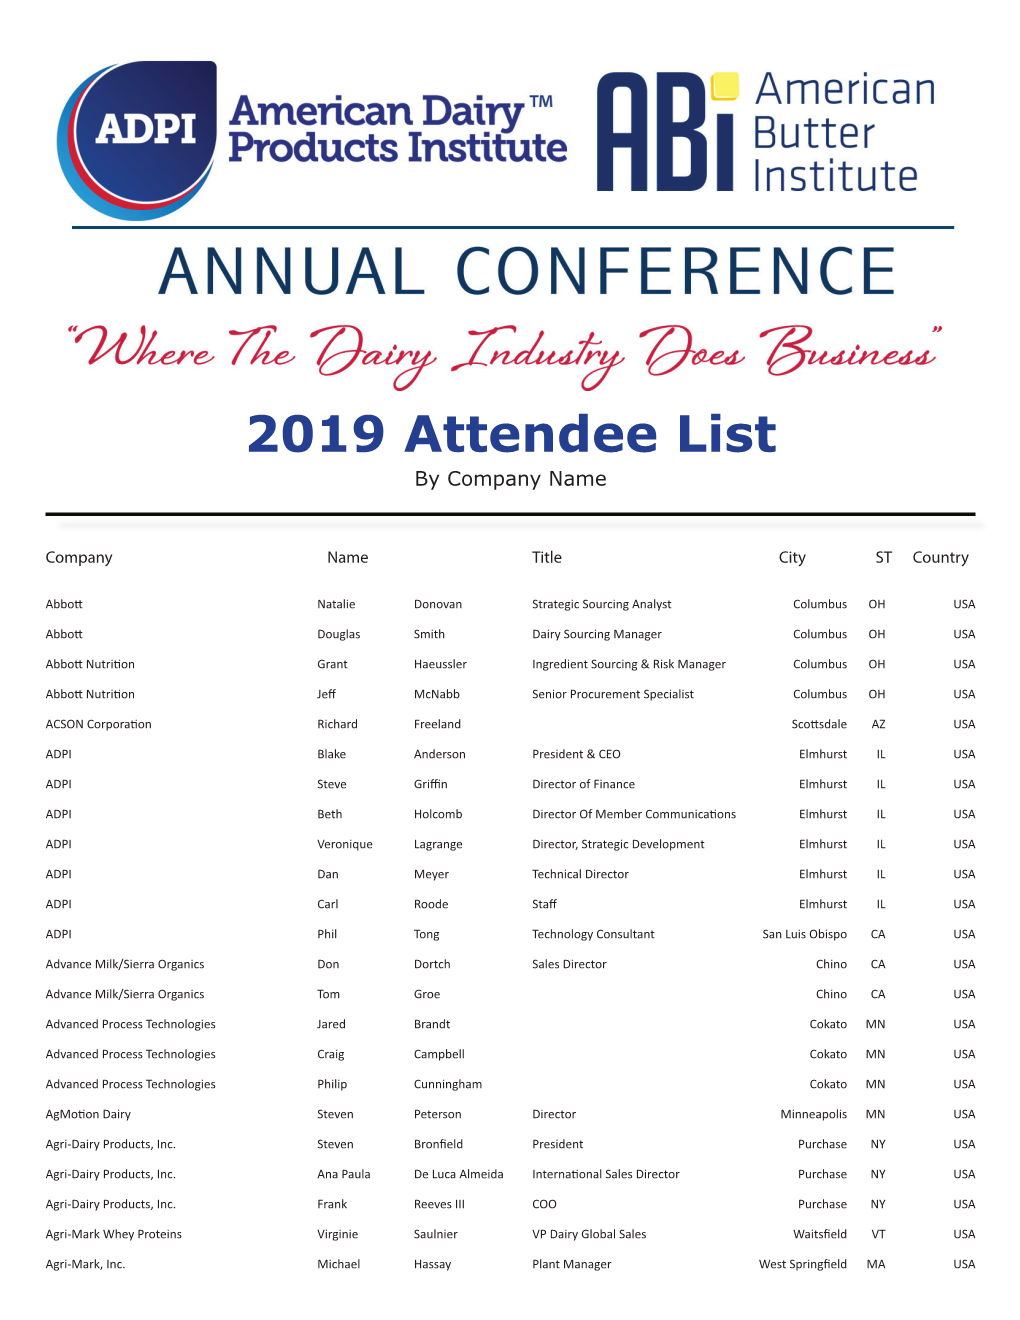 2019 Attendee List by Company Name